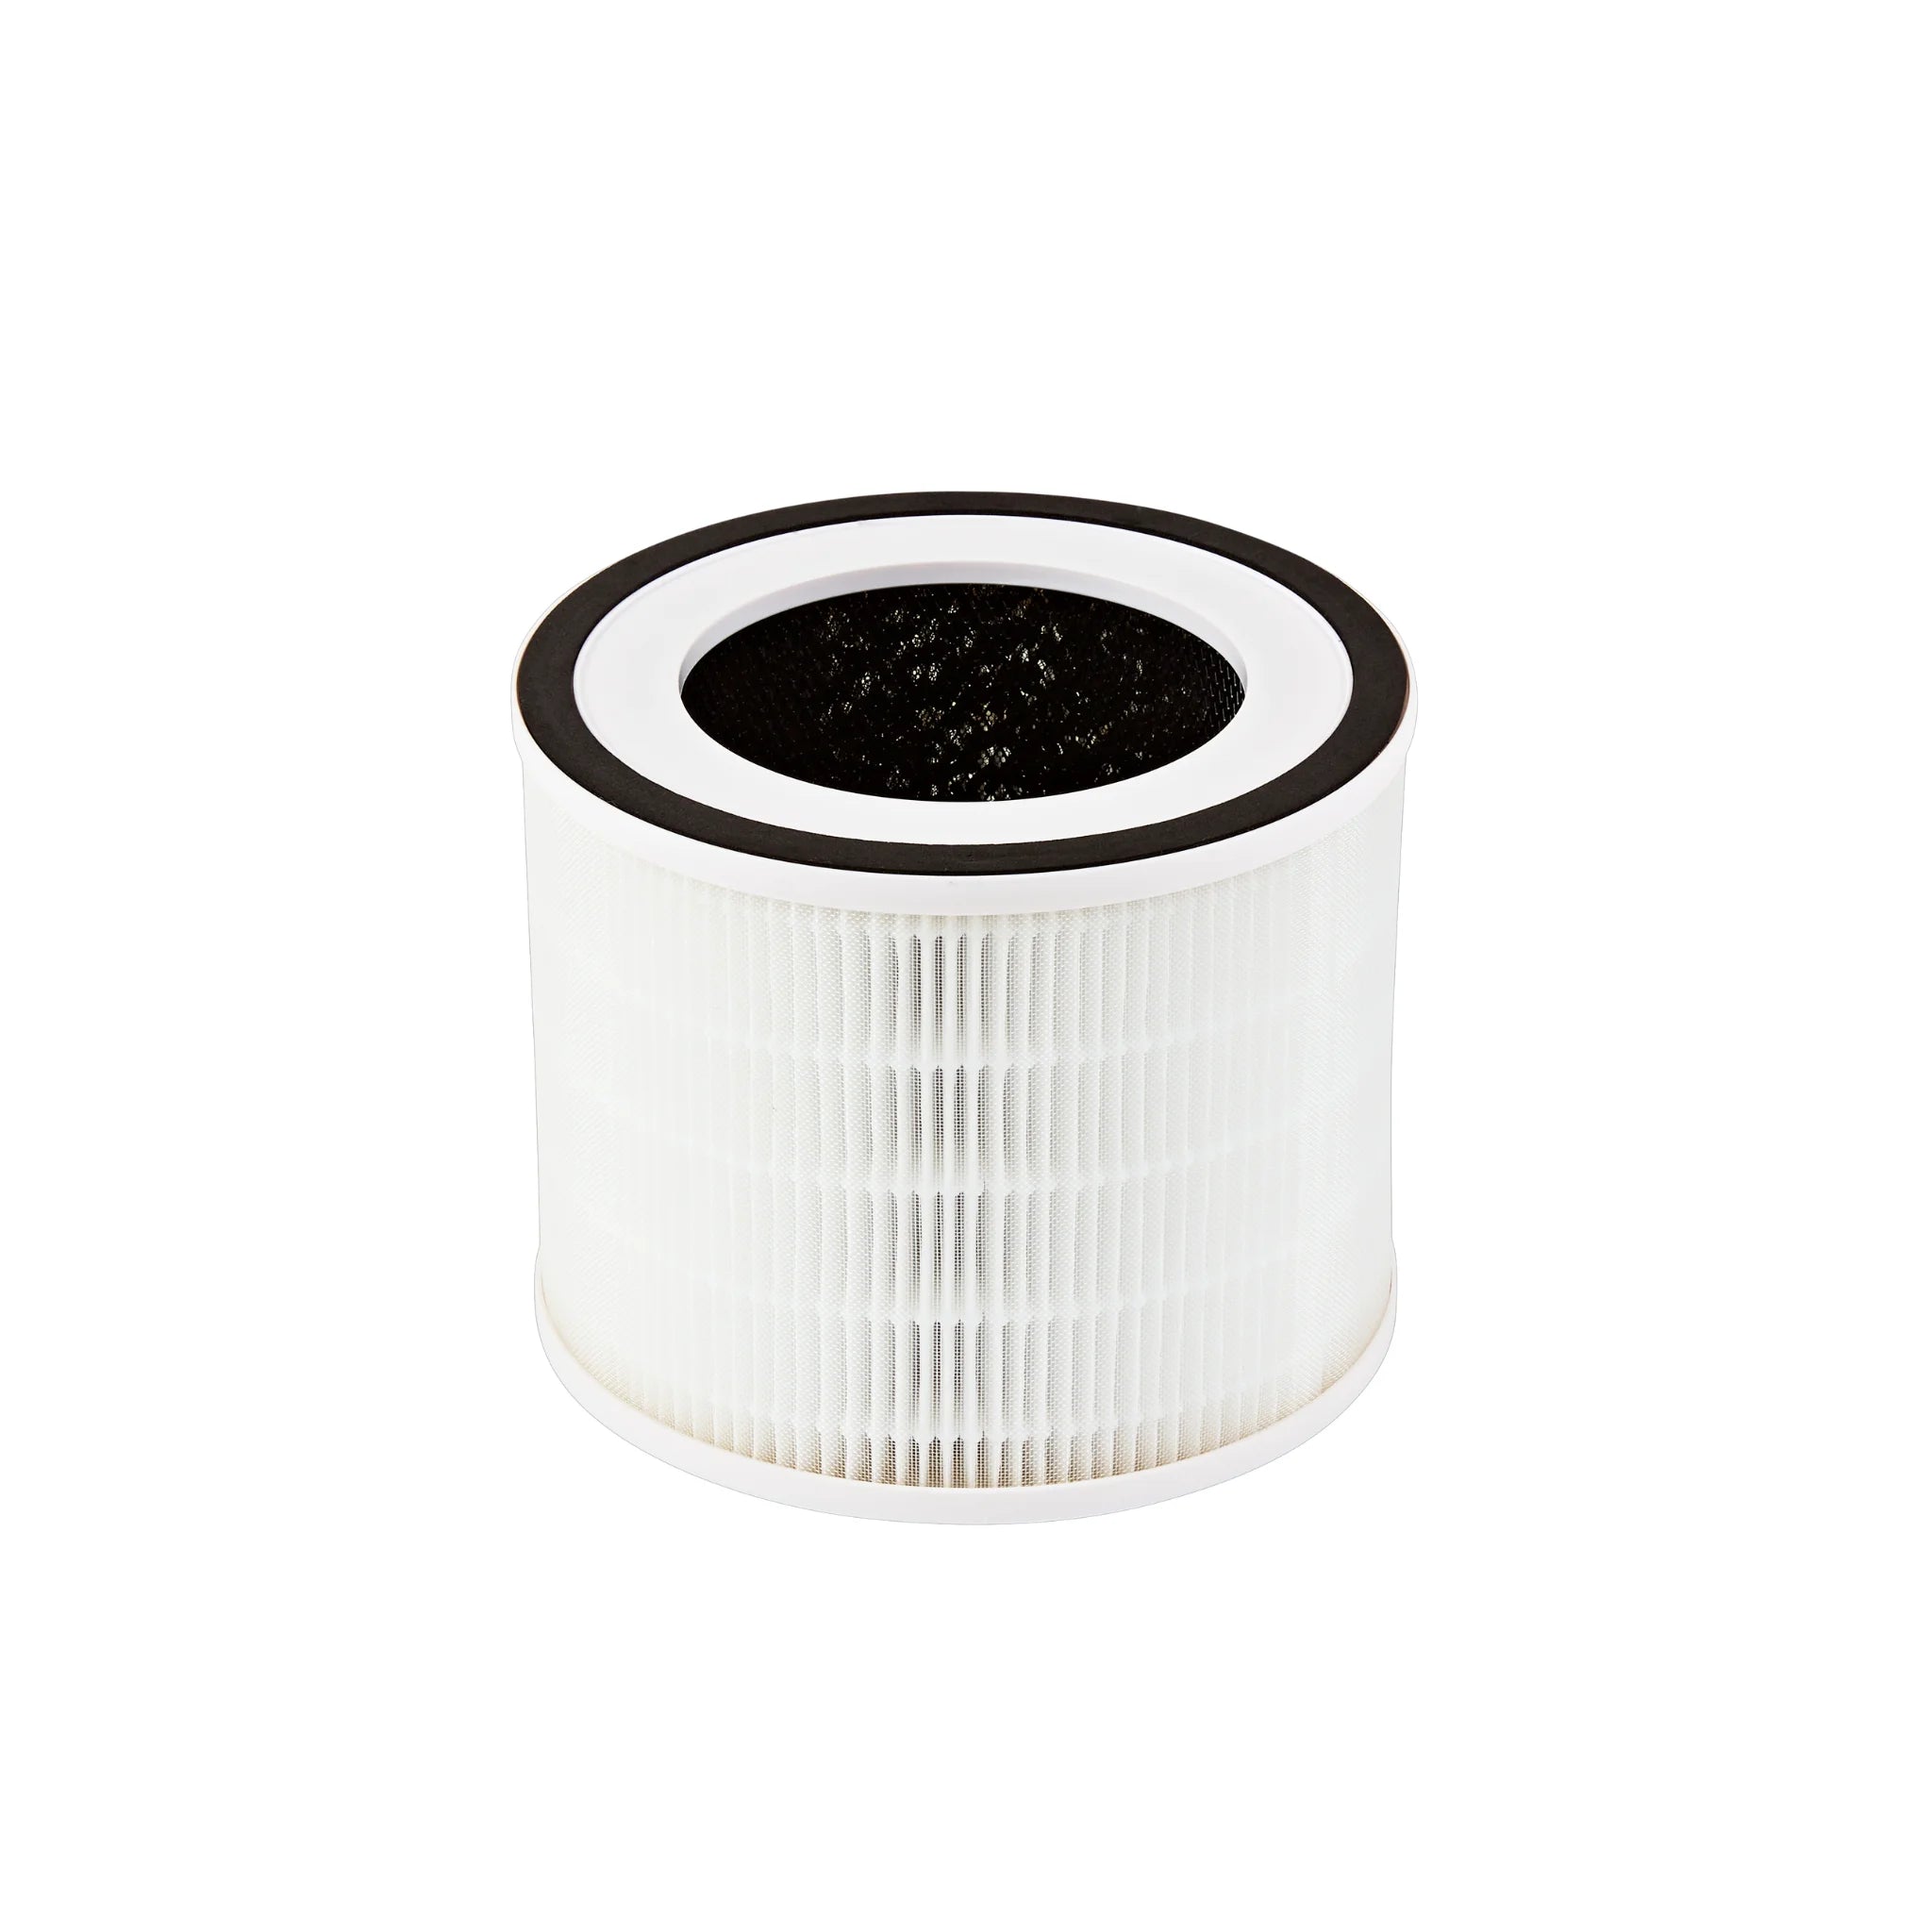 The filter for a Senelux Jupiter Air Purifier on its own. Showing how small and compact the filters are for this purifier.